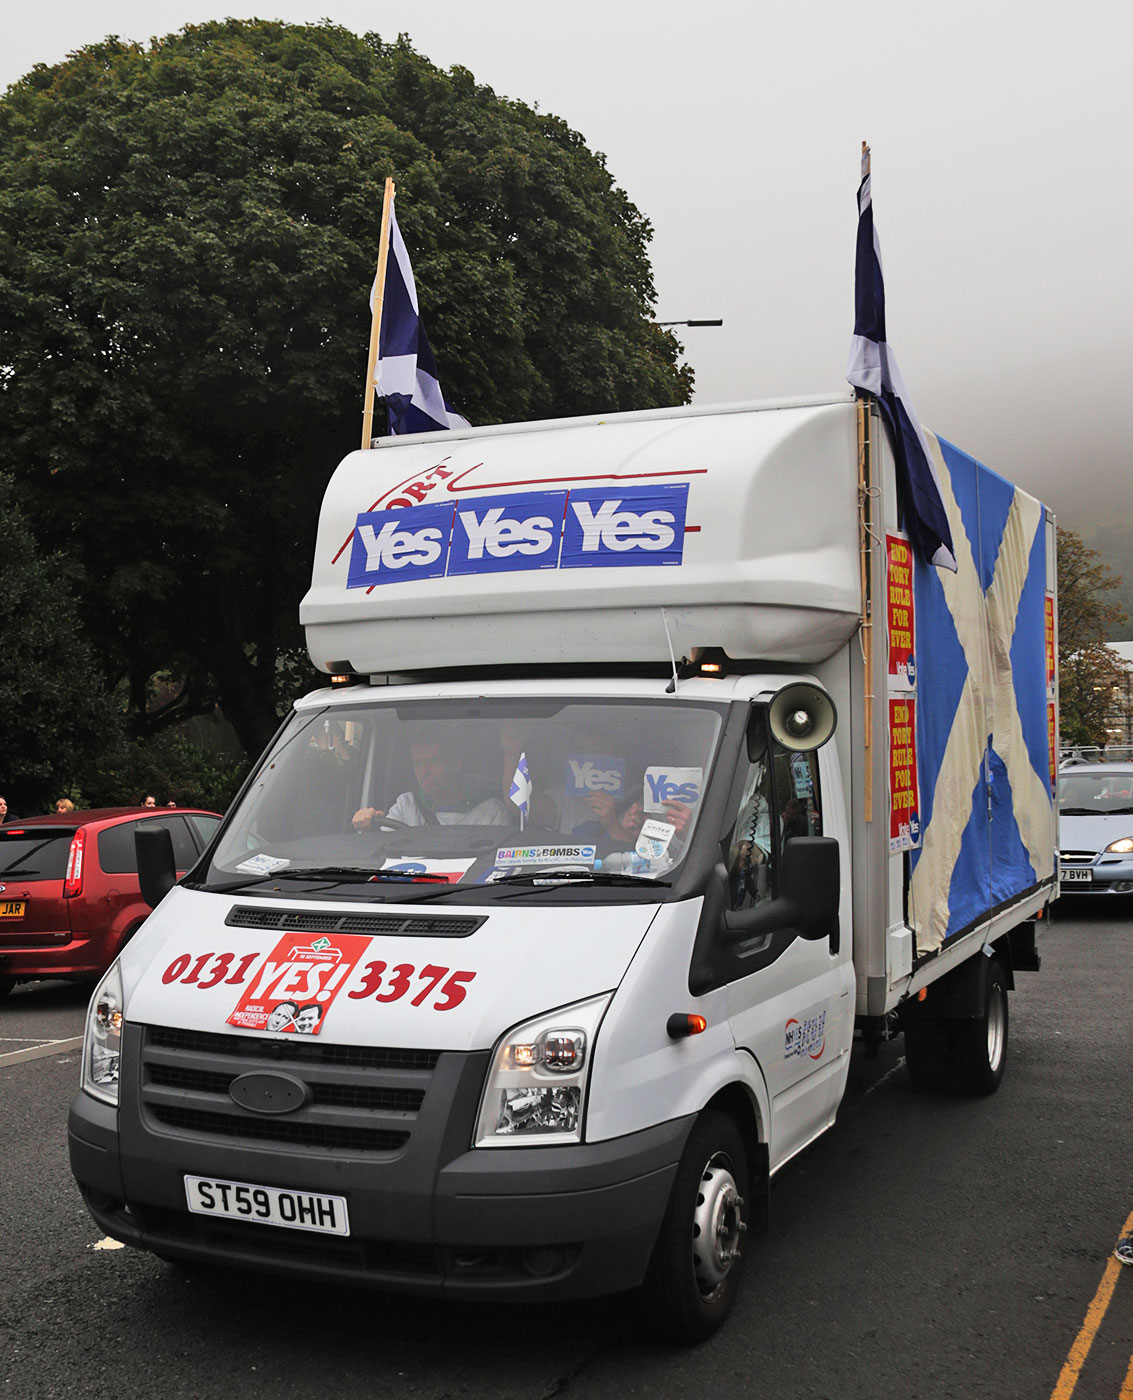 Photos taken in Edinburgh on voting day in the  Scottish Indepemdence Referendum on 18 September 2014  -  Outside the Scottish Parliament  -  The 'Yes' Campaign Van